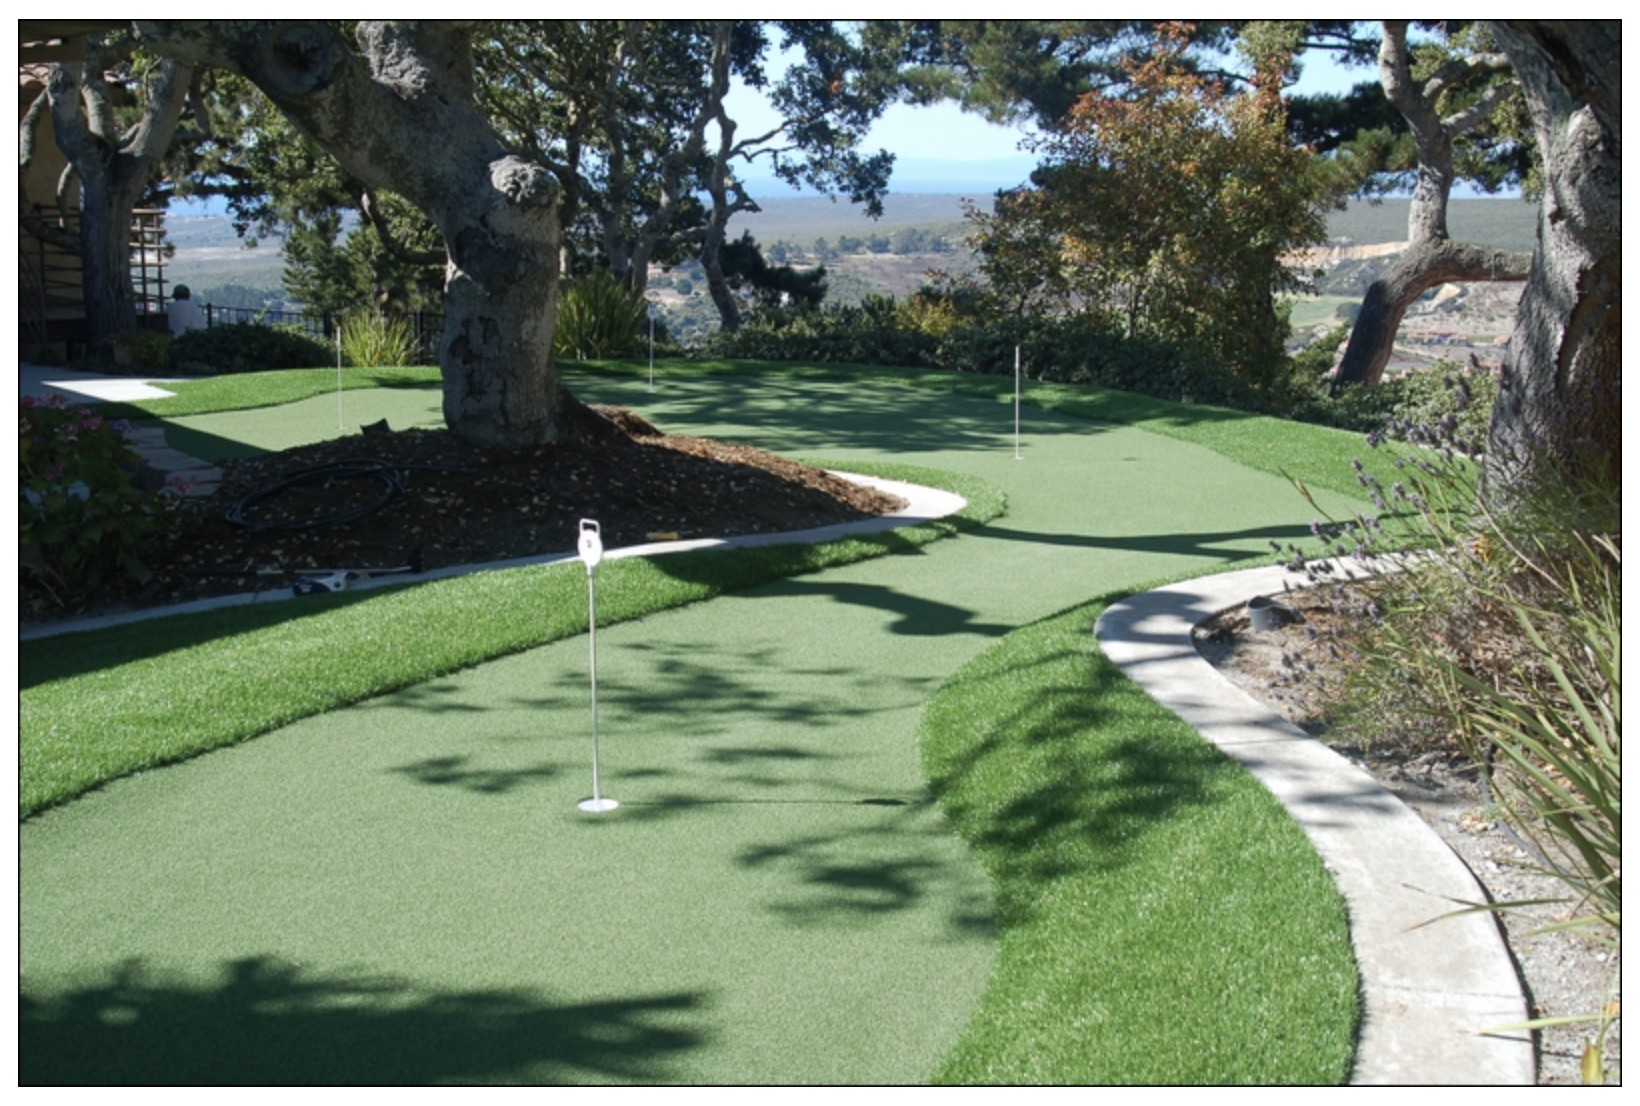 Home Synthetic Turf, Pm Landscaping Monterey